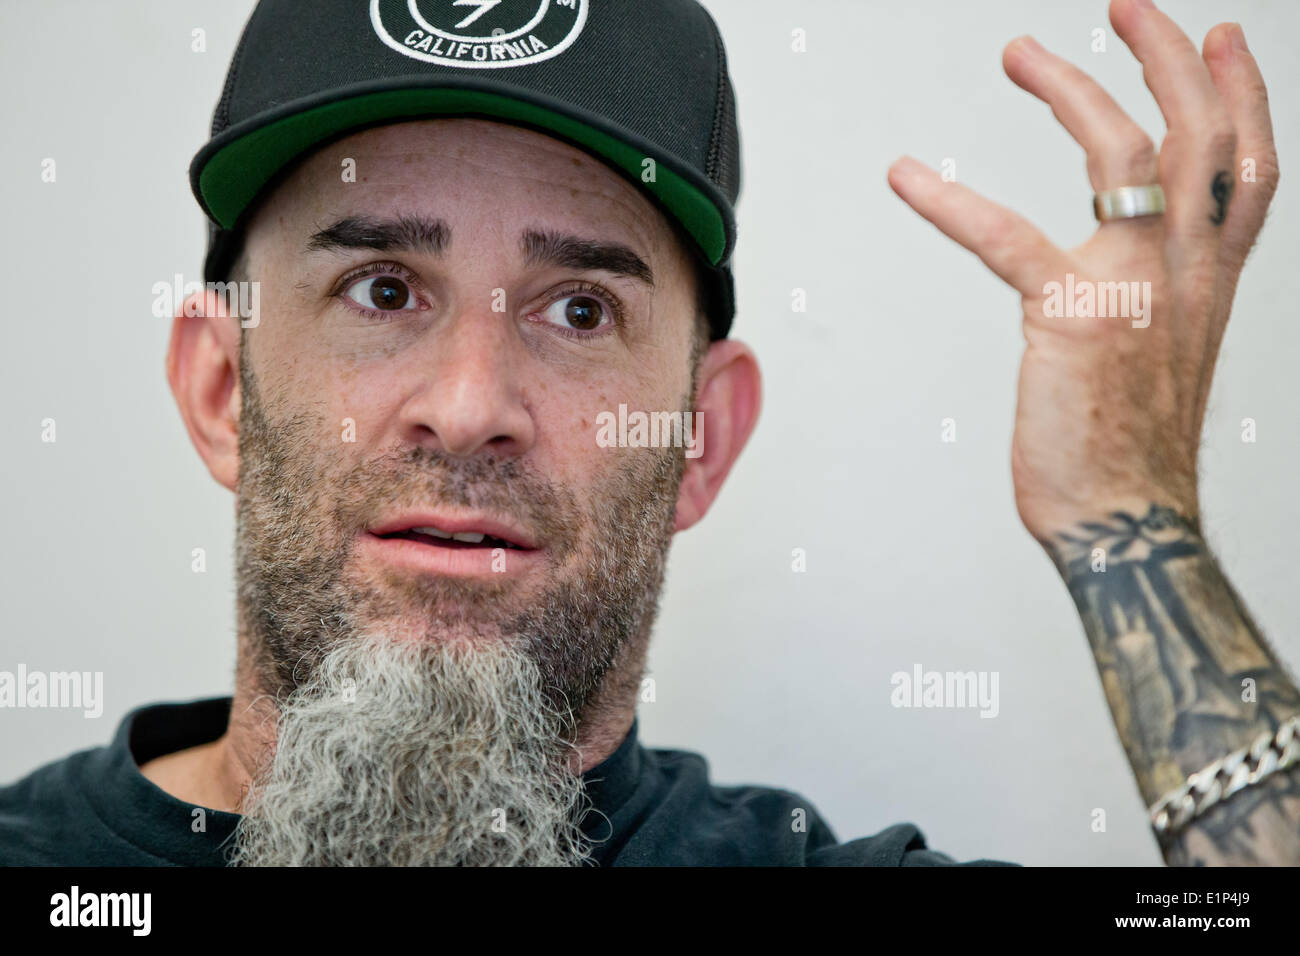 Nuremberg, Germany. 7th June, 2014. Guitarist of the US metal band Anthrax, Scott Ian, pictured during an interview at the 'Rock im Park 2014' m, usic fetical in Nuremberg, Germany, 7 June 2014. The festival continues until 9 June 2014. Photo: Daniel Karmann/dpa/Alamy Live News Stock Photo